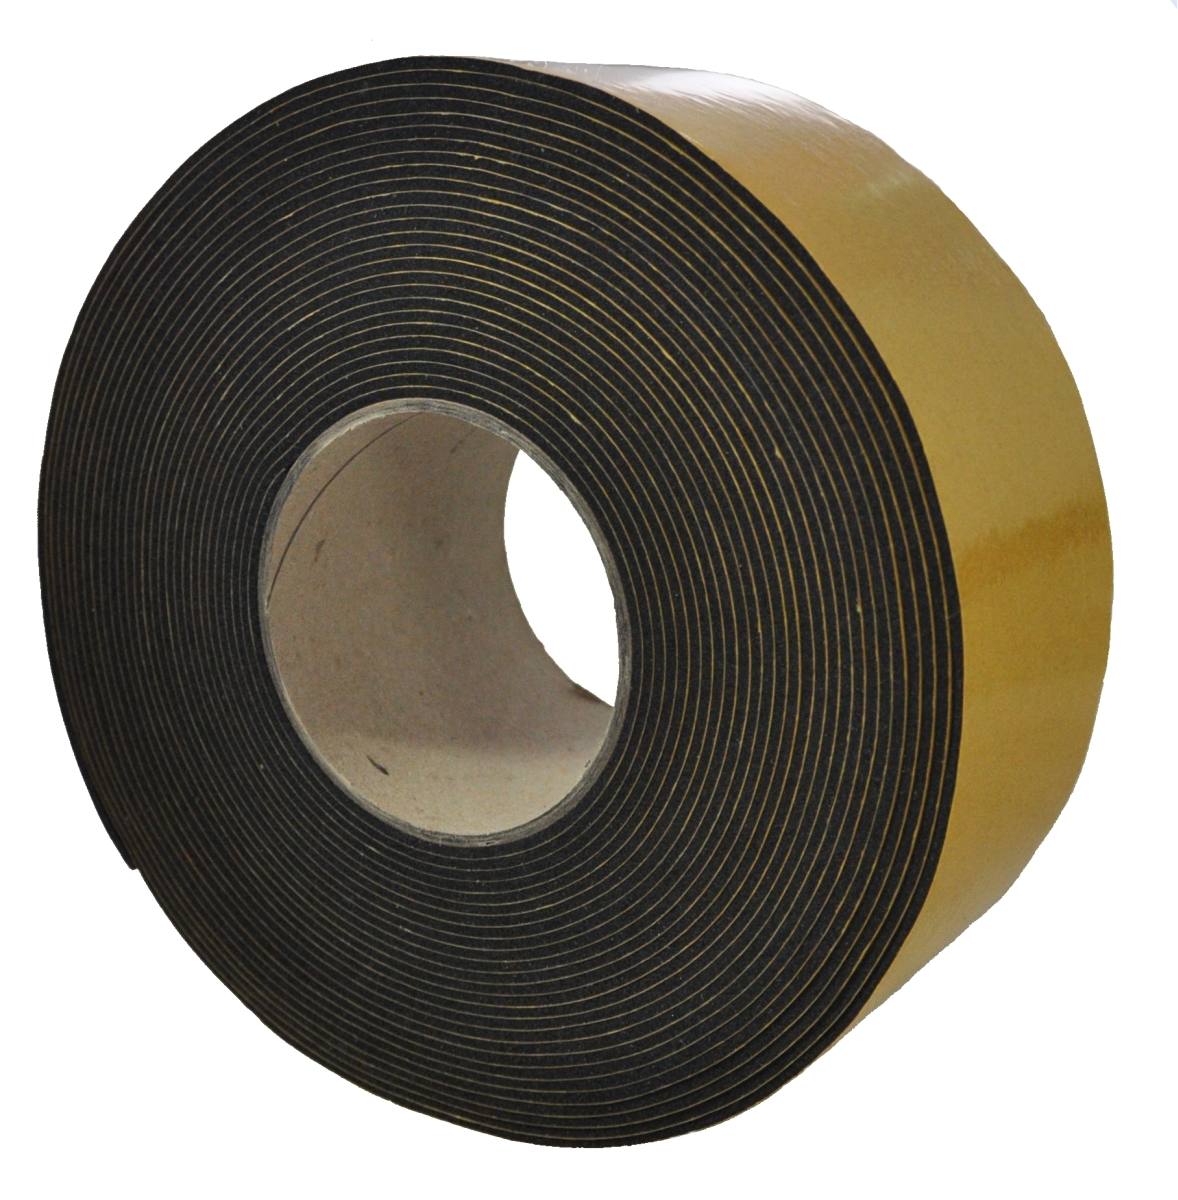 S-K-S EPDM 3mmx38mmx10m black self-adhesive on one side